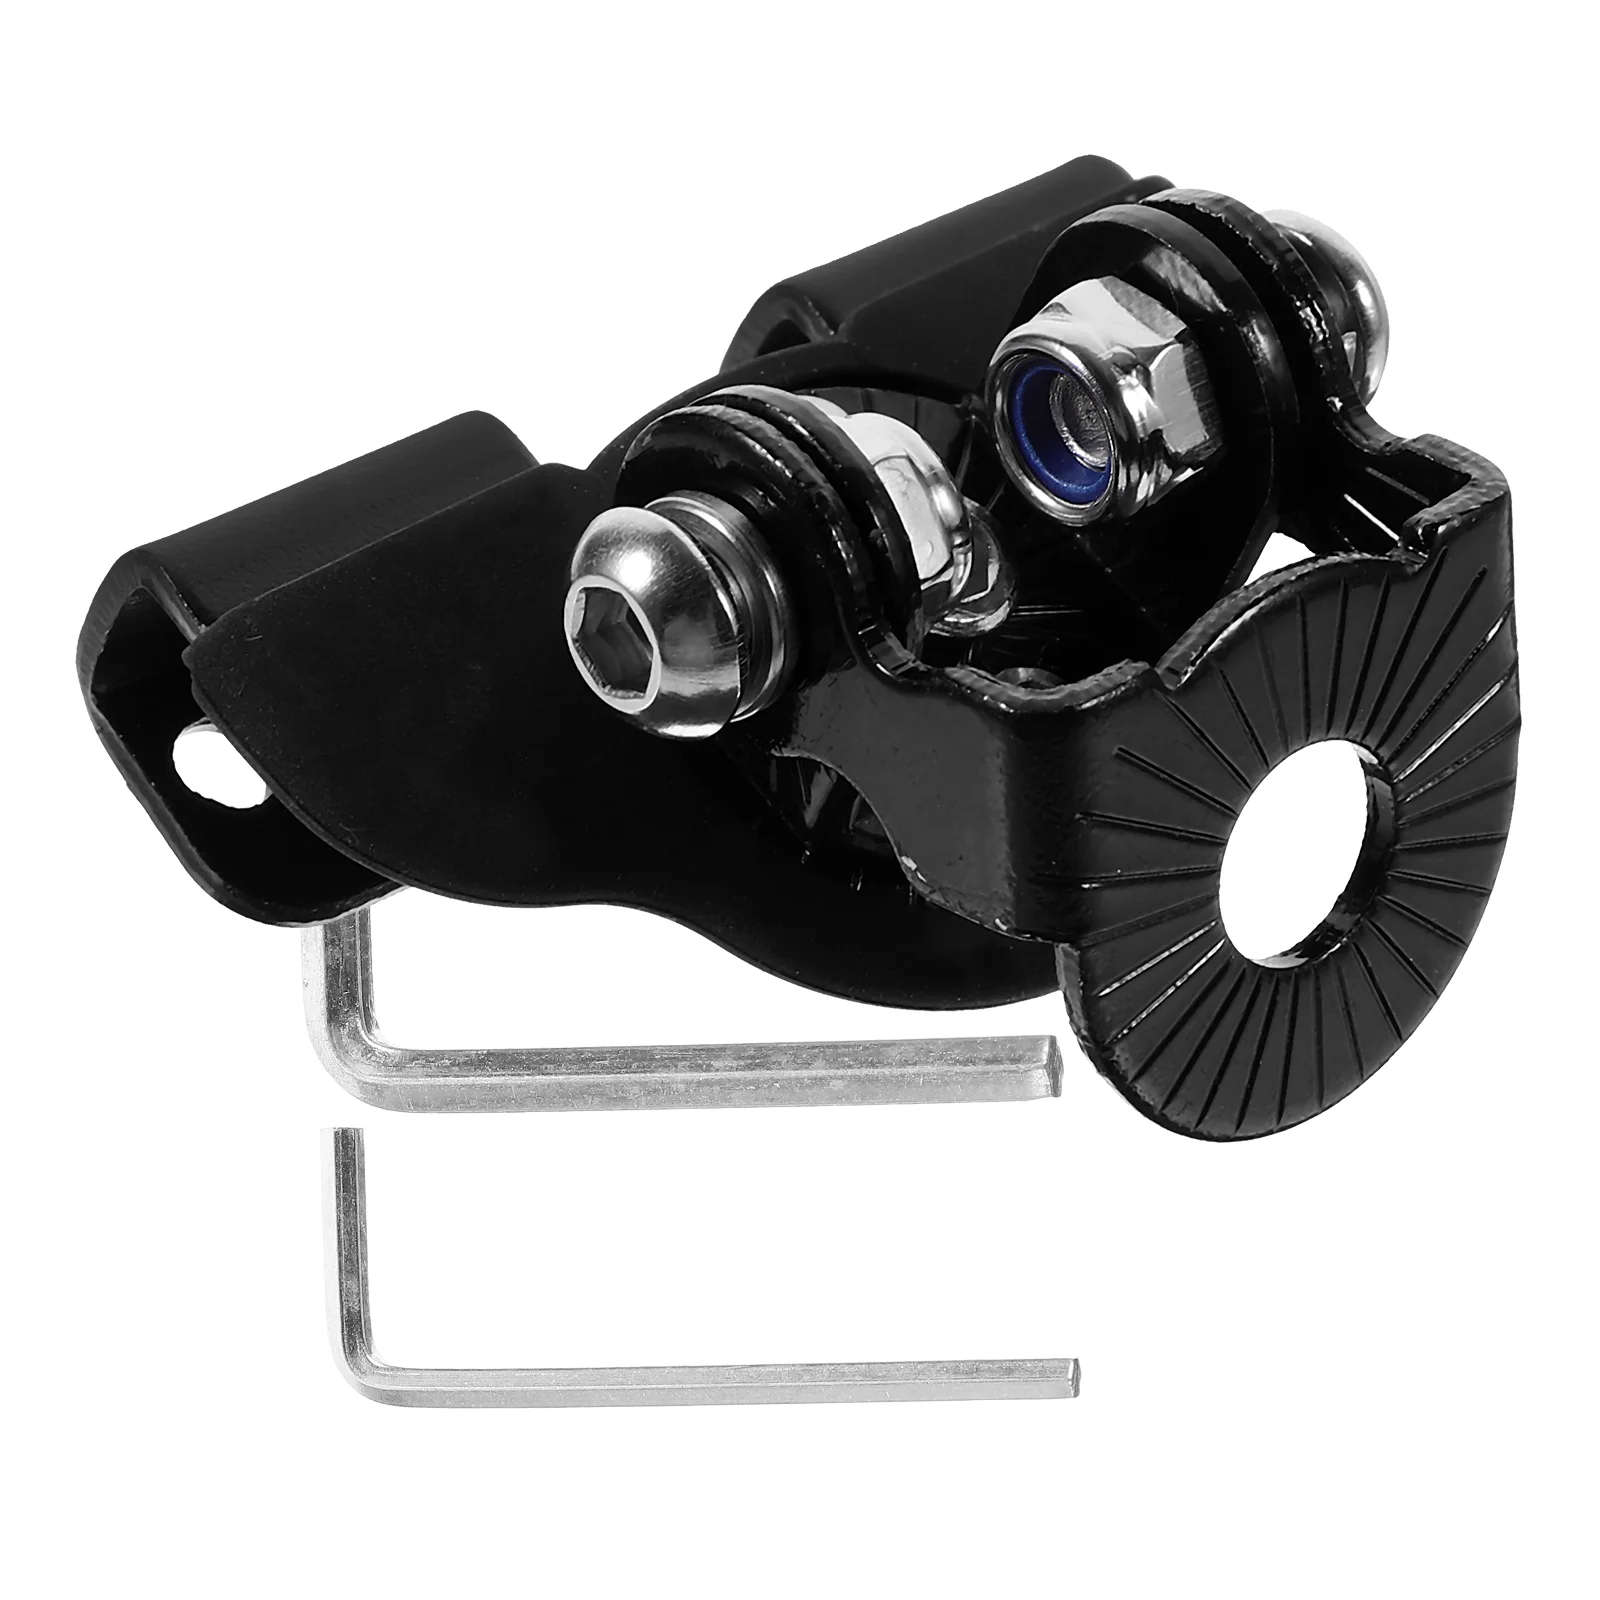 

Car Spotlight Bracket Mount Brackets for Offroad Auxiliary Hood LED Mounting Accessories Iron Bar Work Mounts